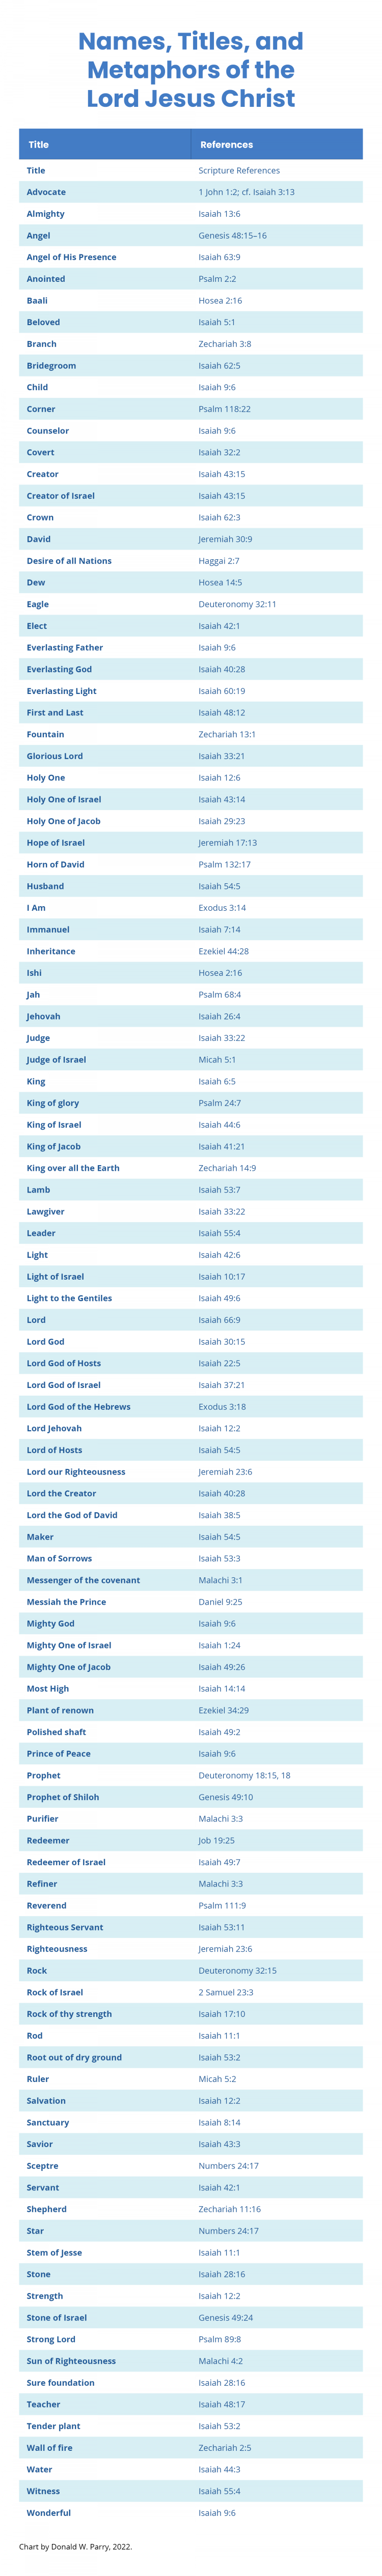 Chart by Donald W. Parry. The Names, Titles, and Metaphors of the Lord Jesus Christ.